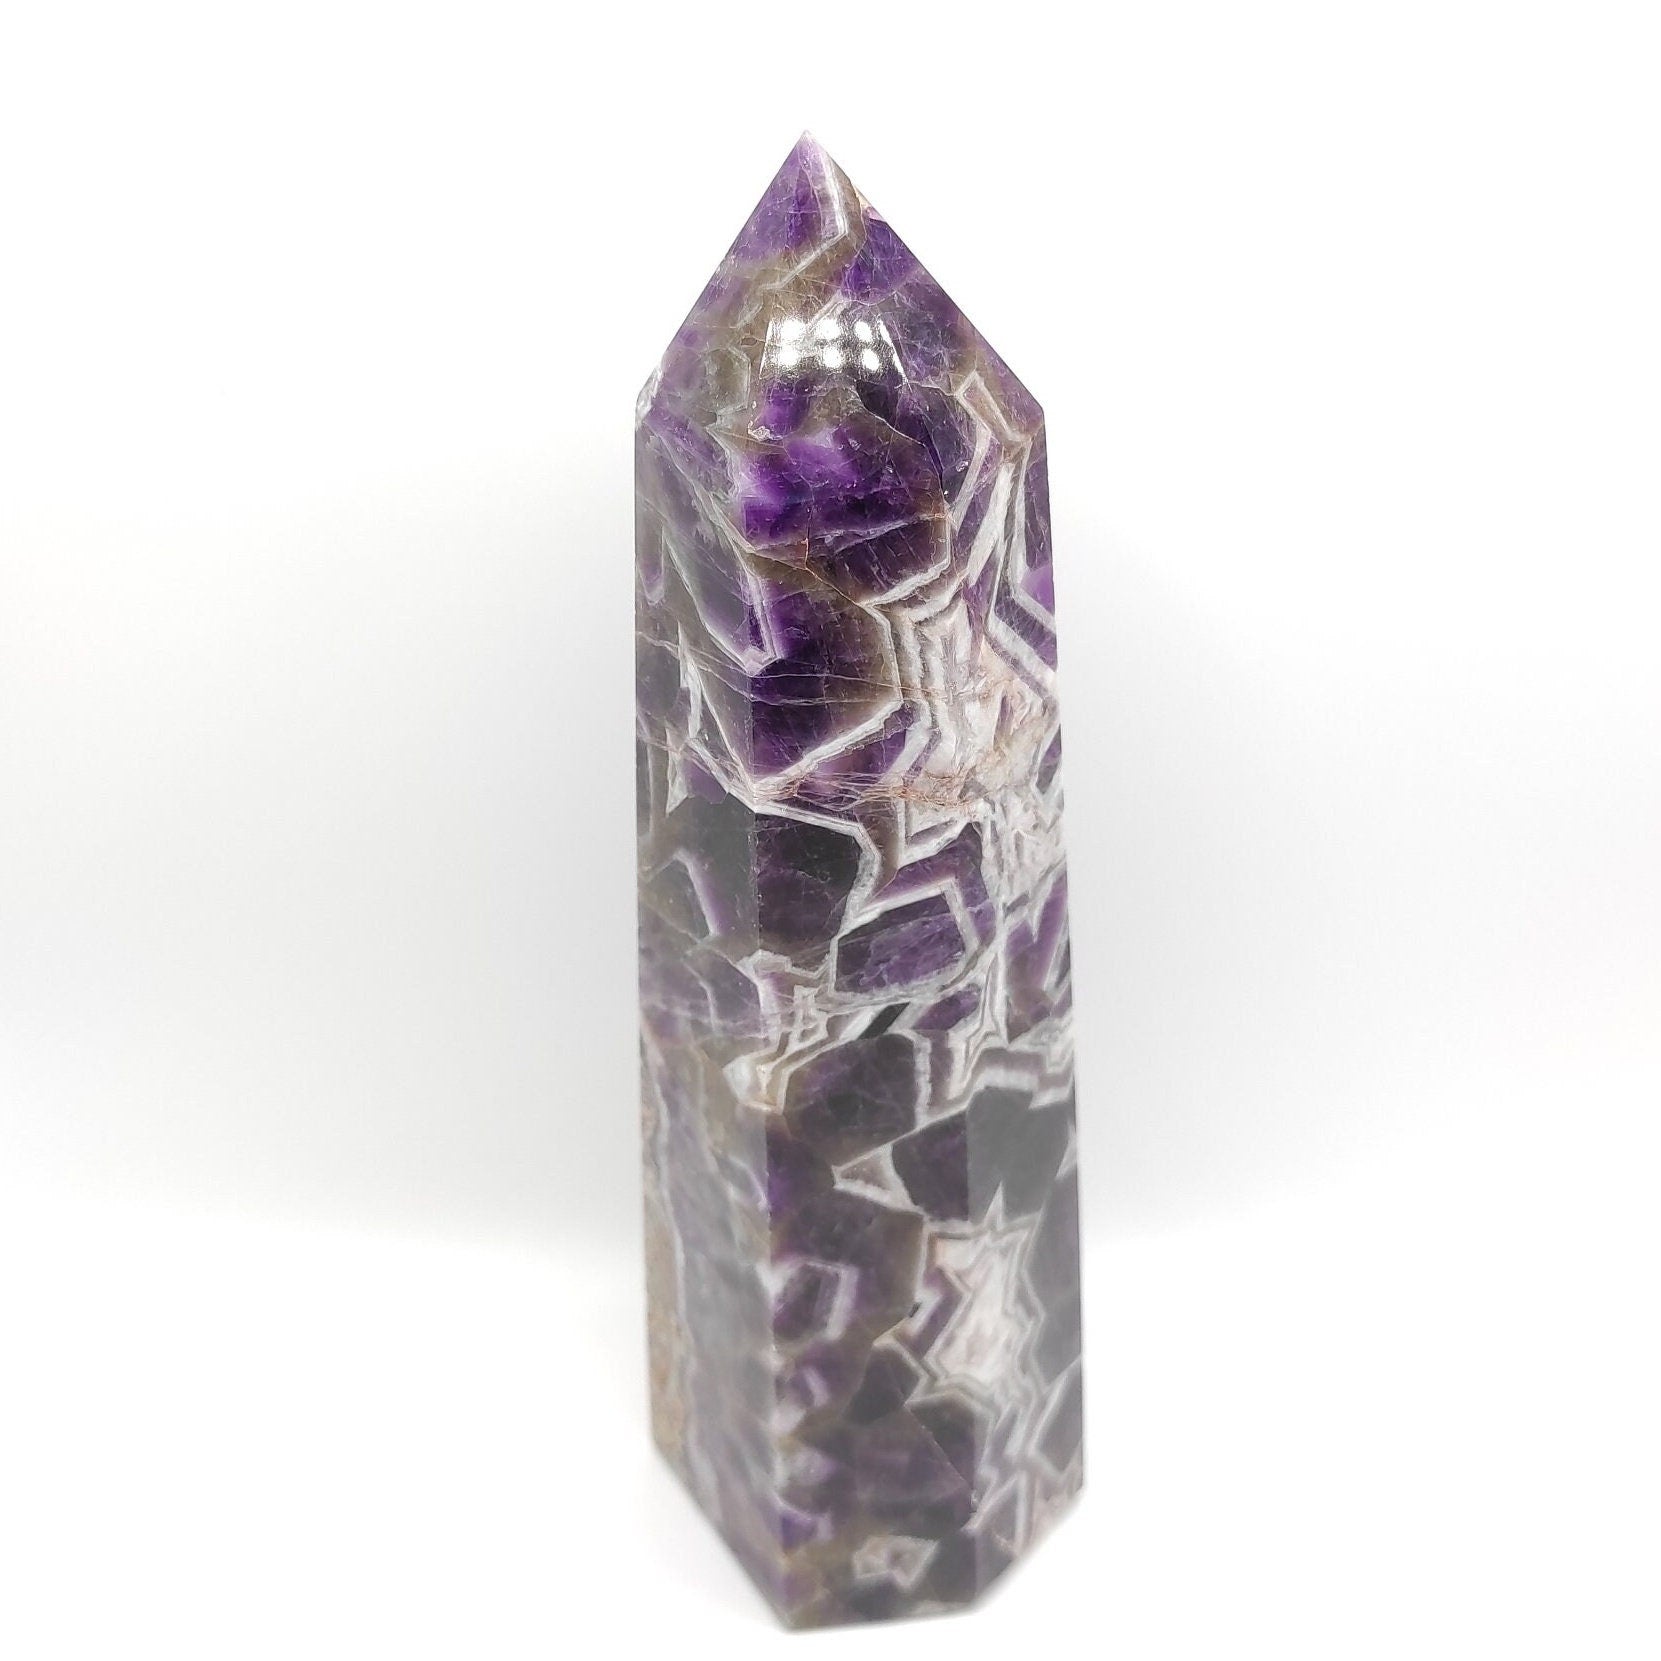 676g Chevron Amethyst Tower Natural Purple and White Amethyst Striped Amethyst Dream Amethyst Point Amethyst Crystal Point Large Crystals